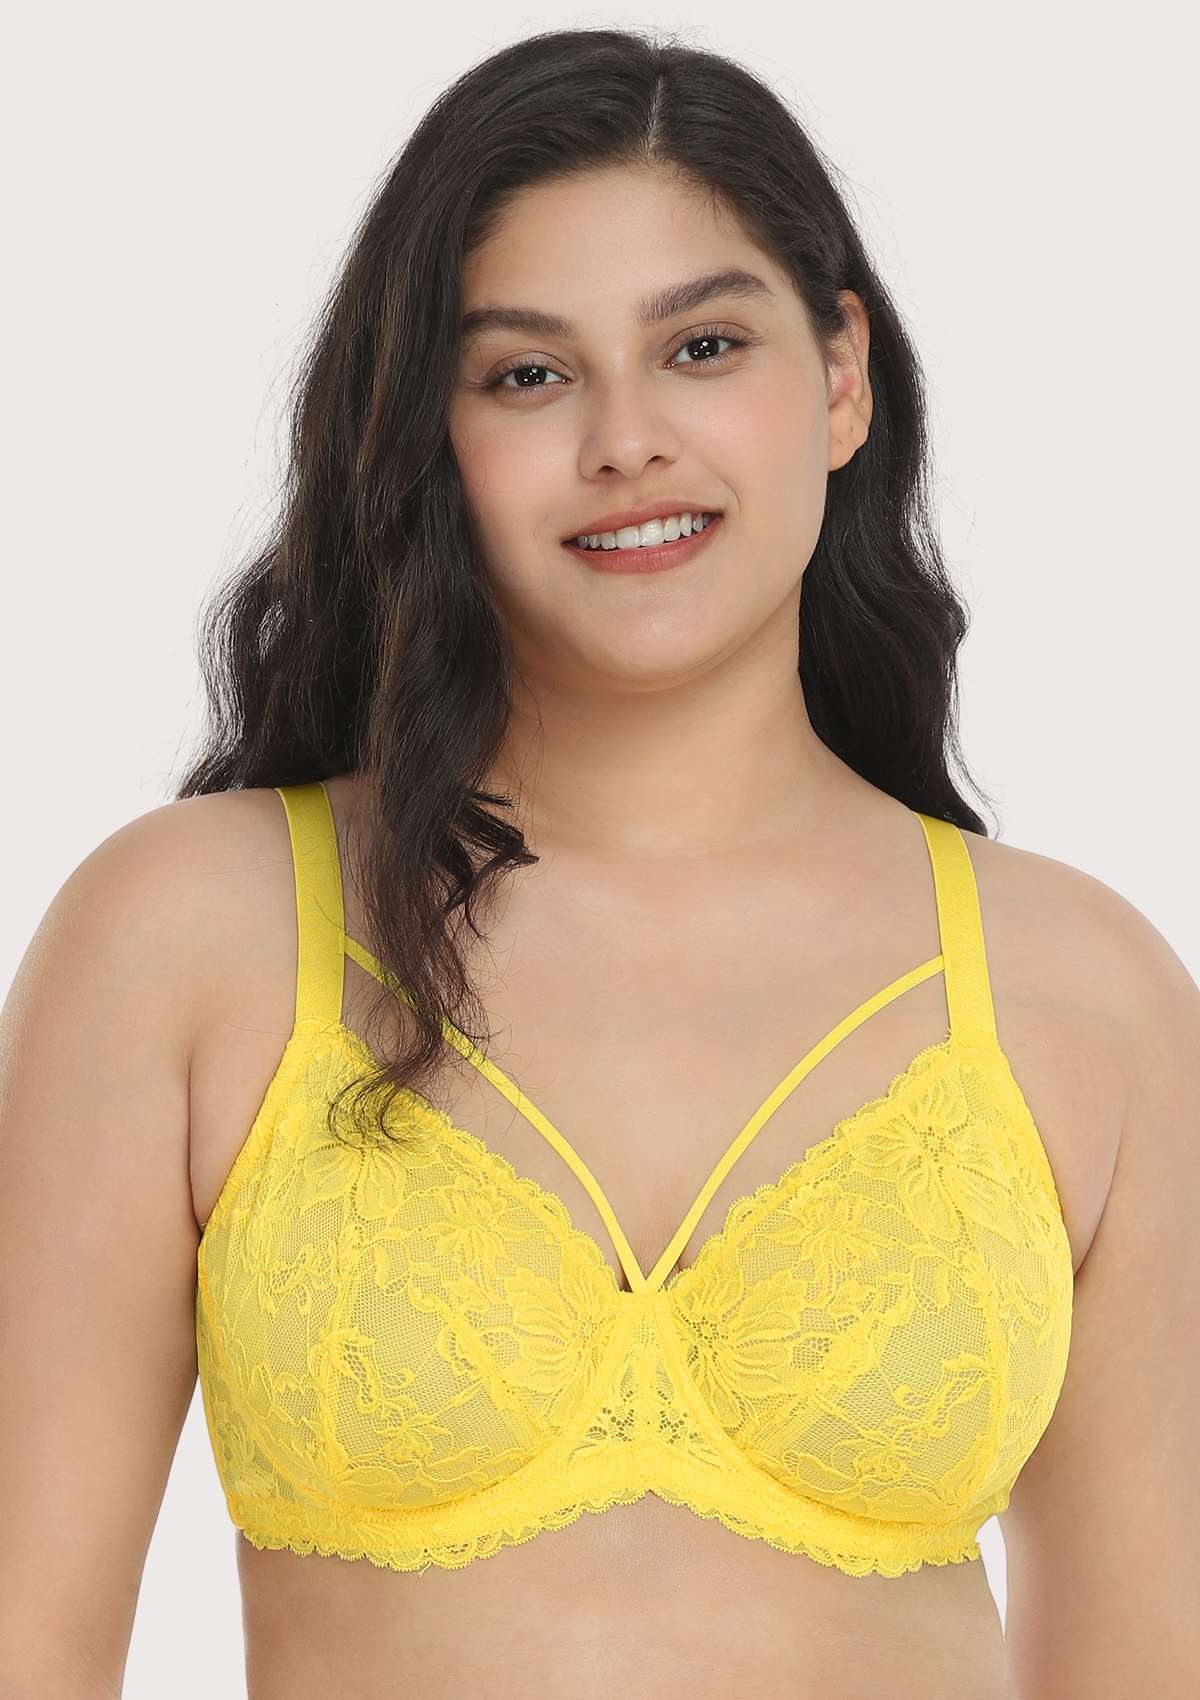 HSIA Unlined Lace Mesh Minimizer Bra For Large Breasts, Full Coverage - Bright Green / 40 / D